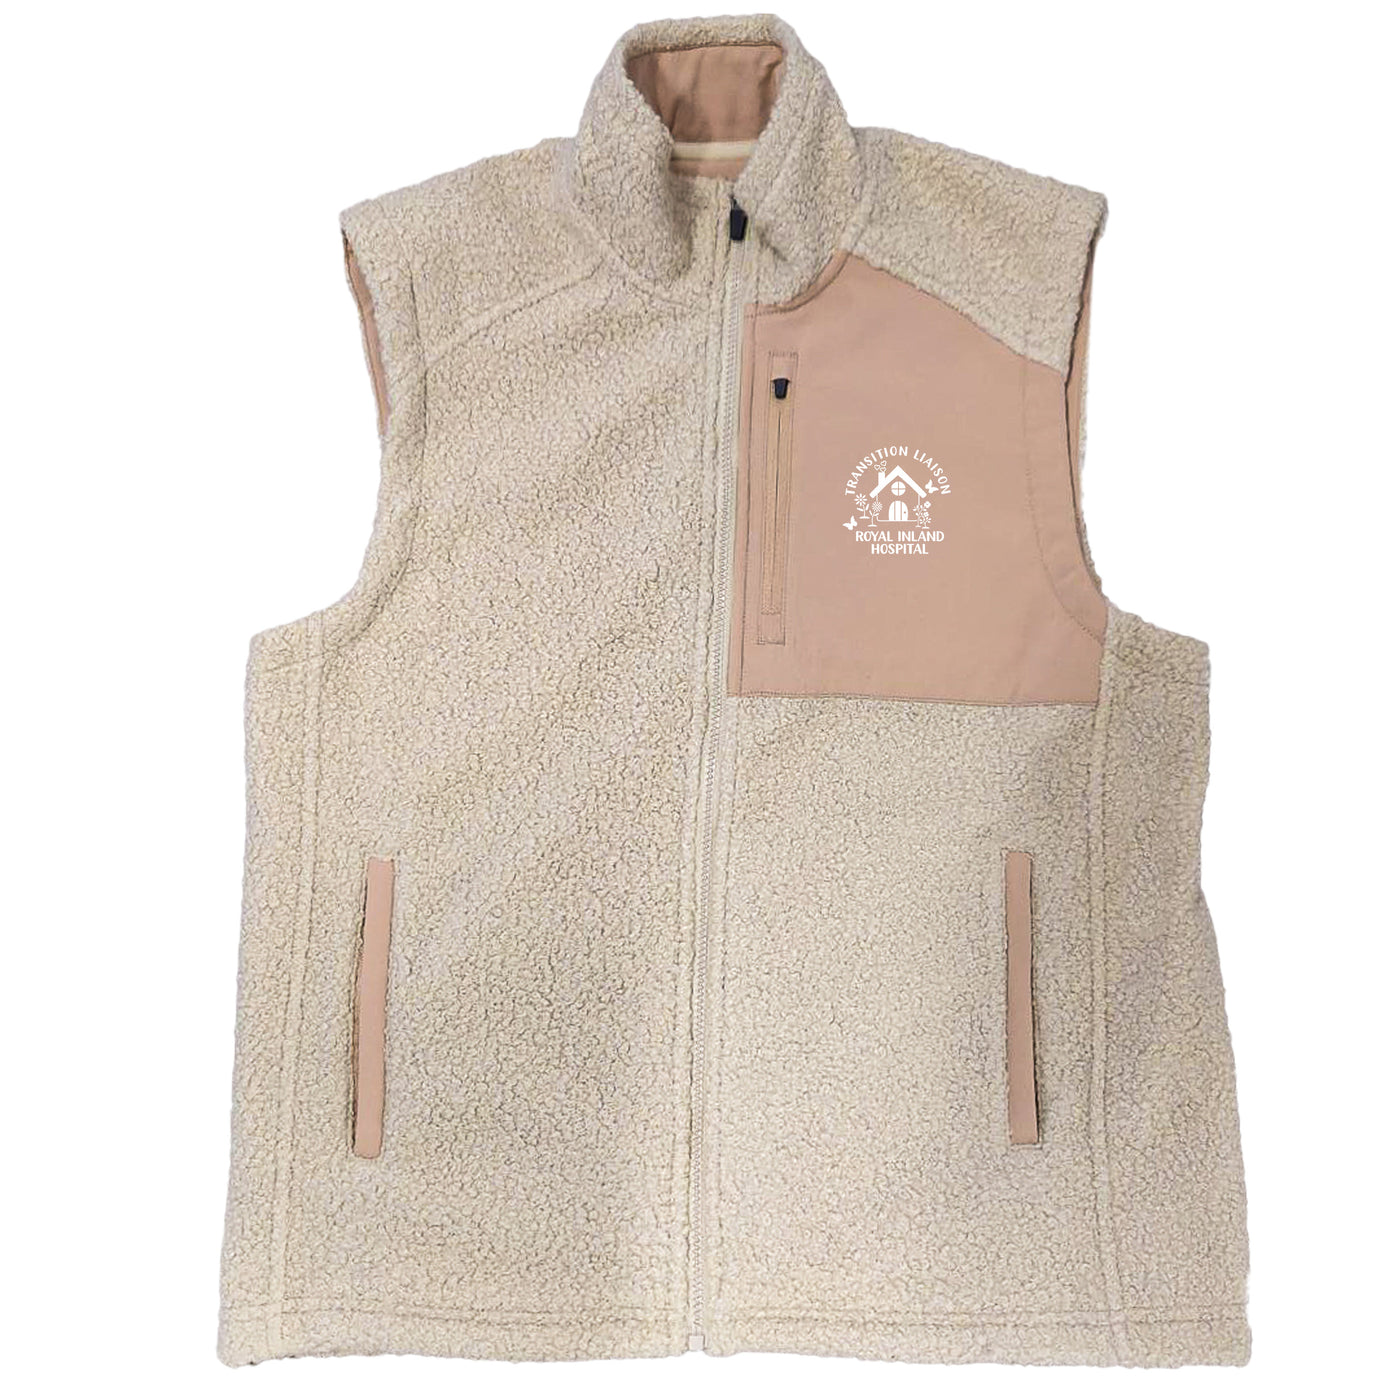 Royal Inland Hospital Transition Liaison - Round 2 - Code Cozy Vest